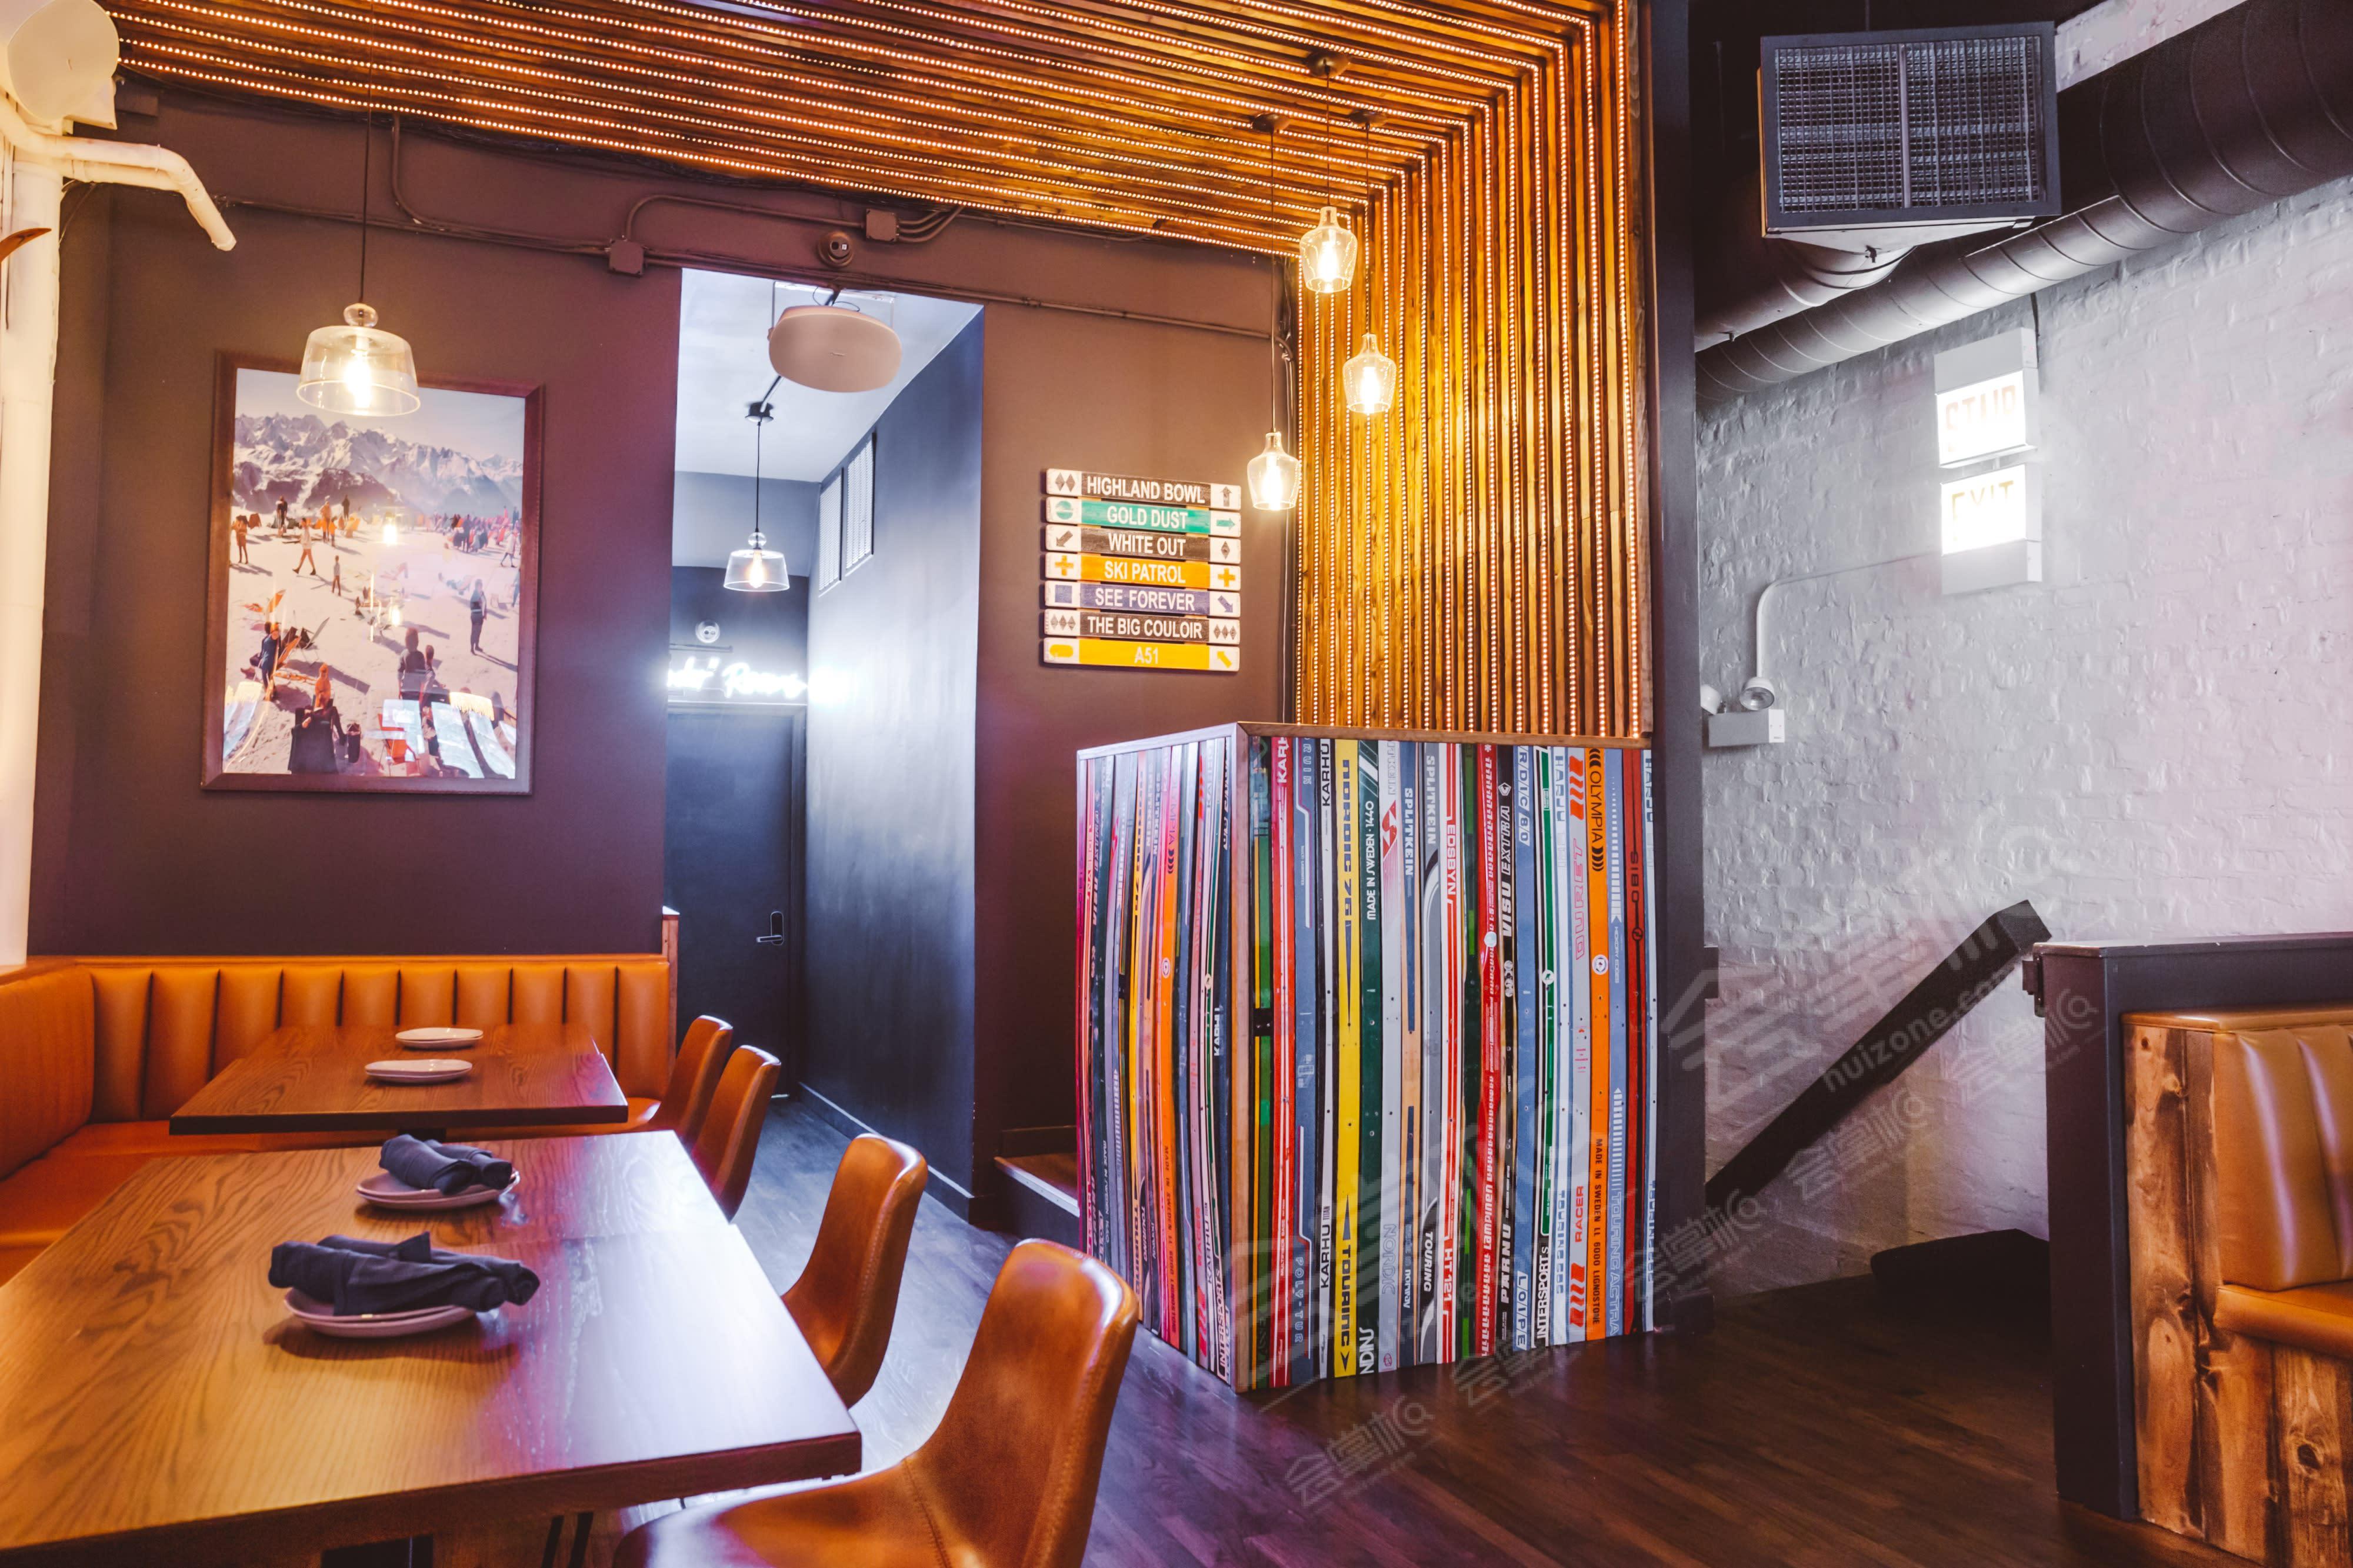 Apres Ski-themed 2 floor event space in Downtown Chicago's River North Neighborhood